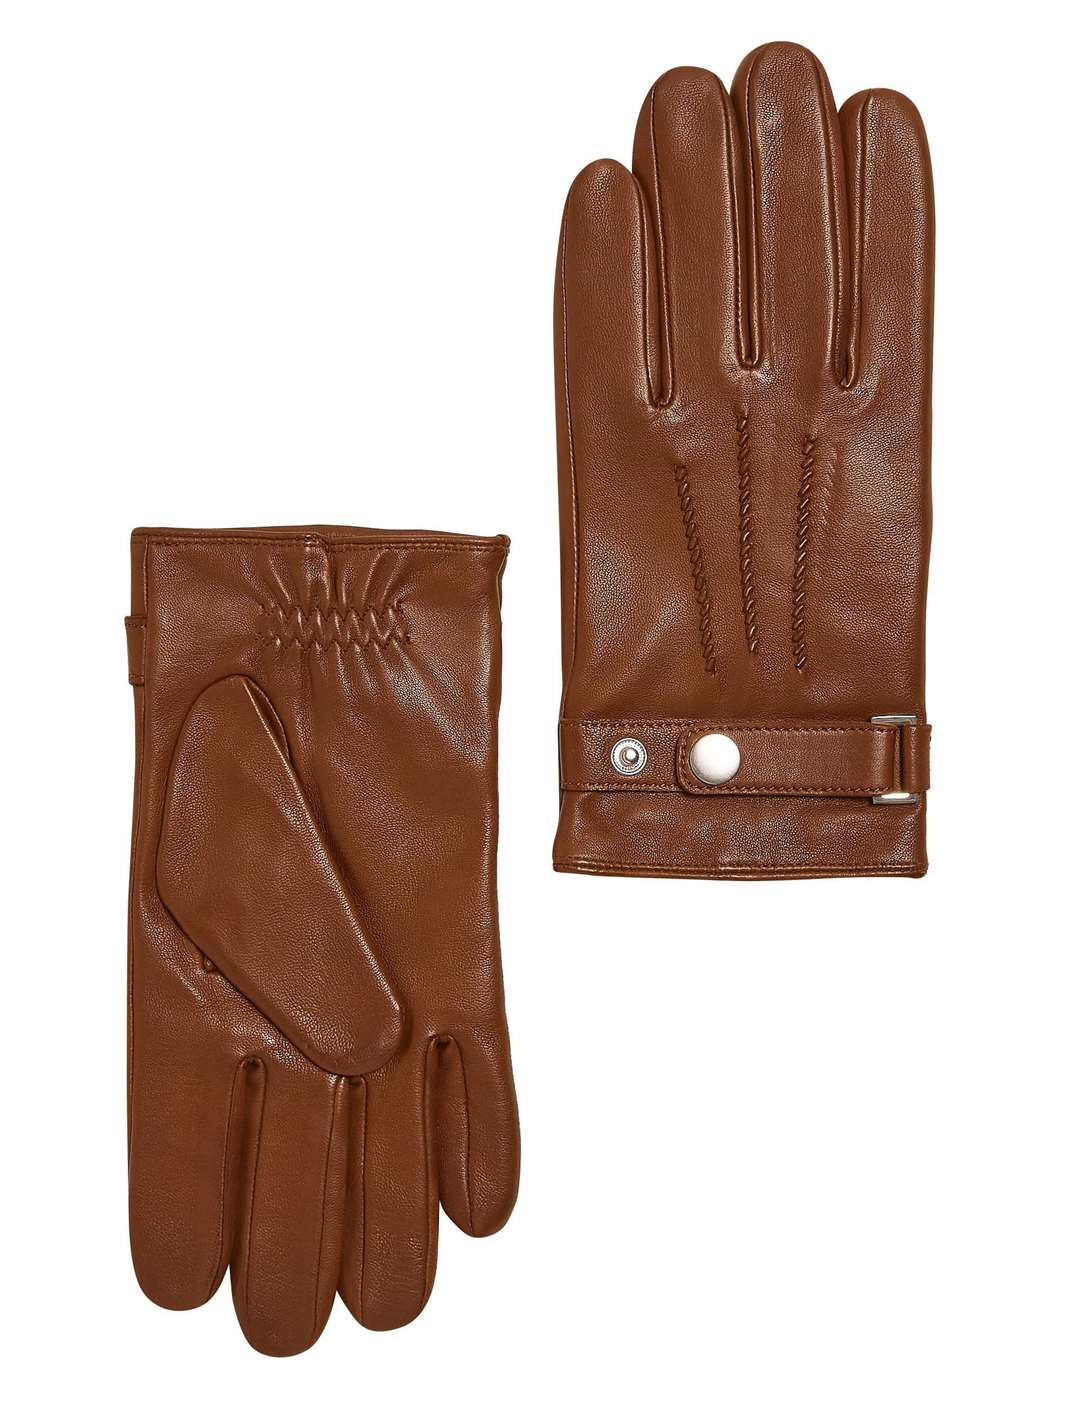 Leather Gloves. Picture: Handout/PA.